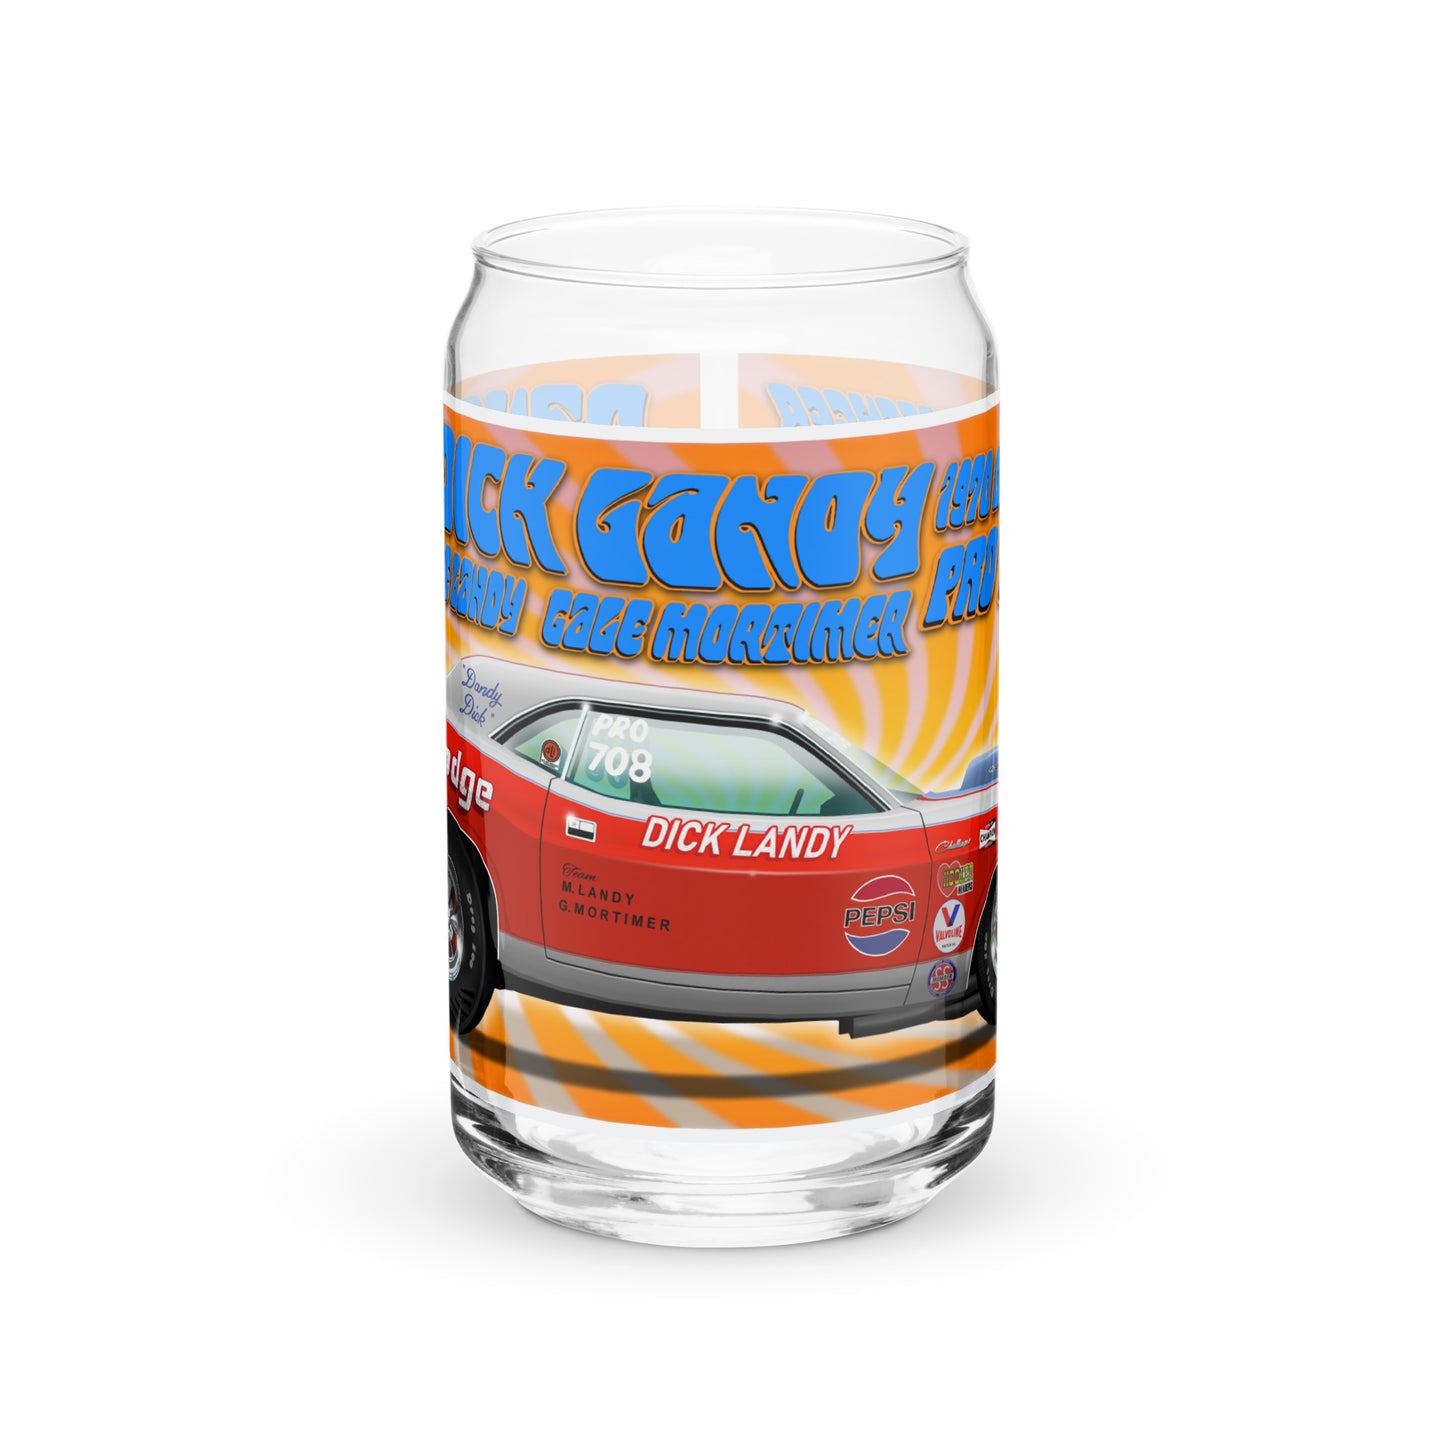 Dick Landy 1970 Challenger Can-shaped glass